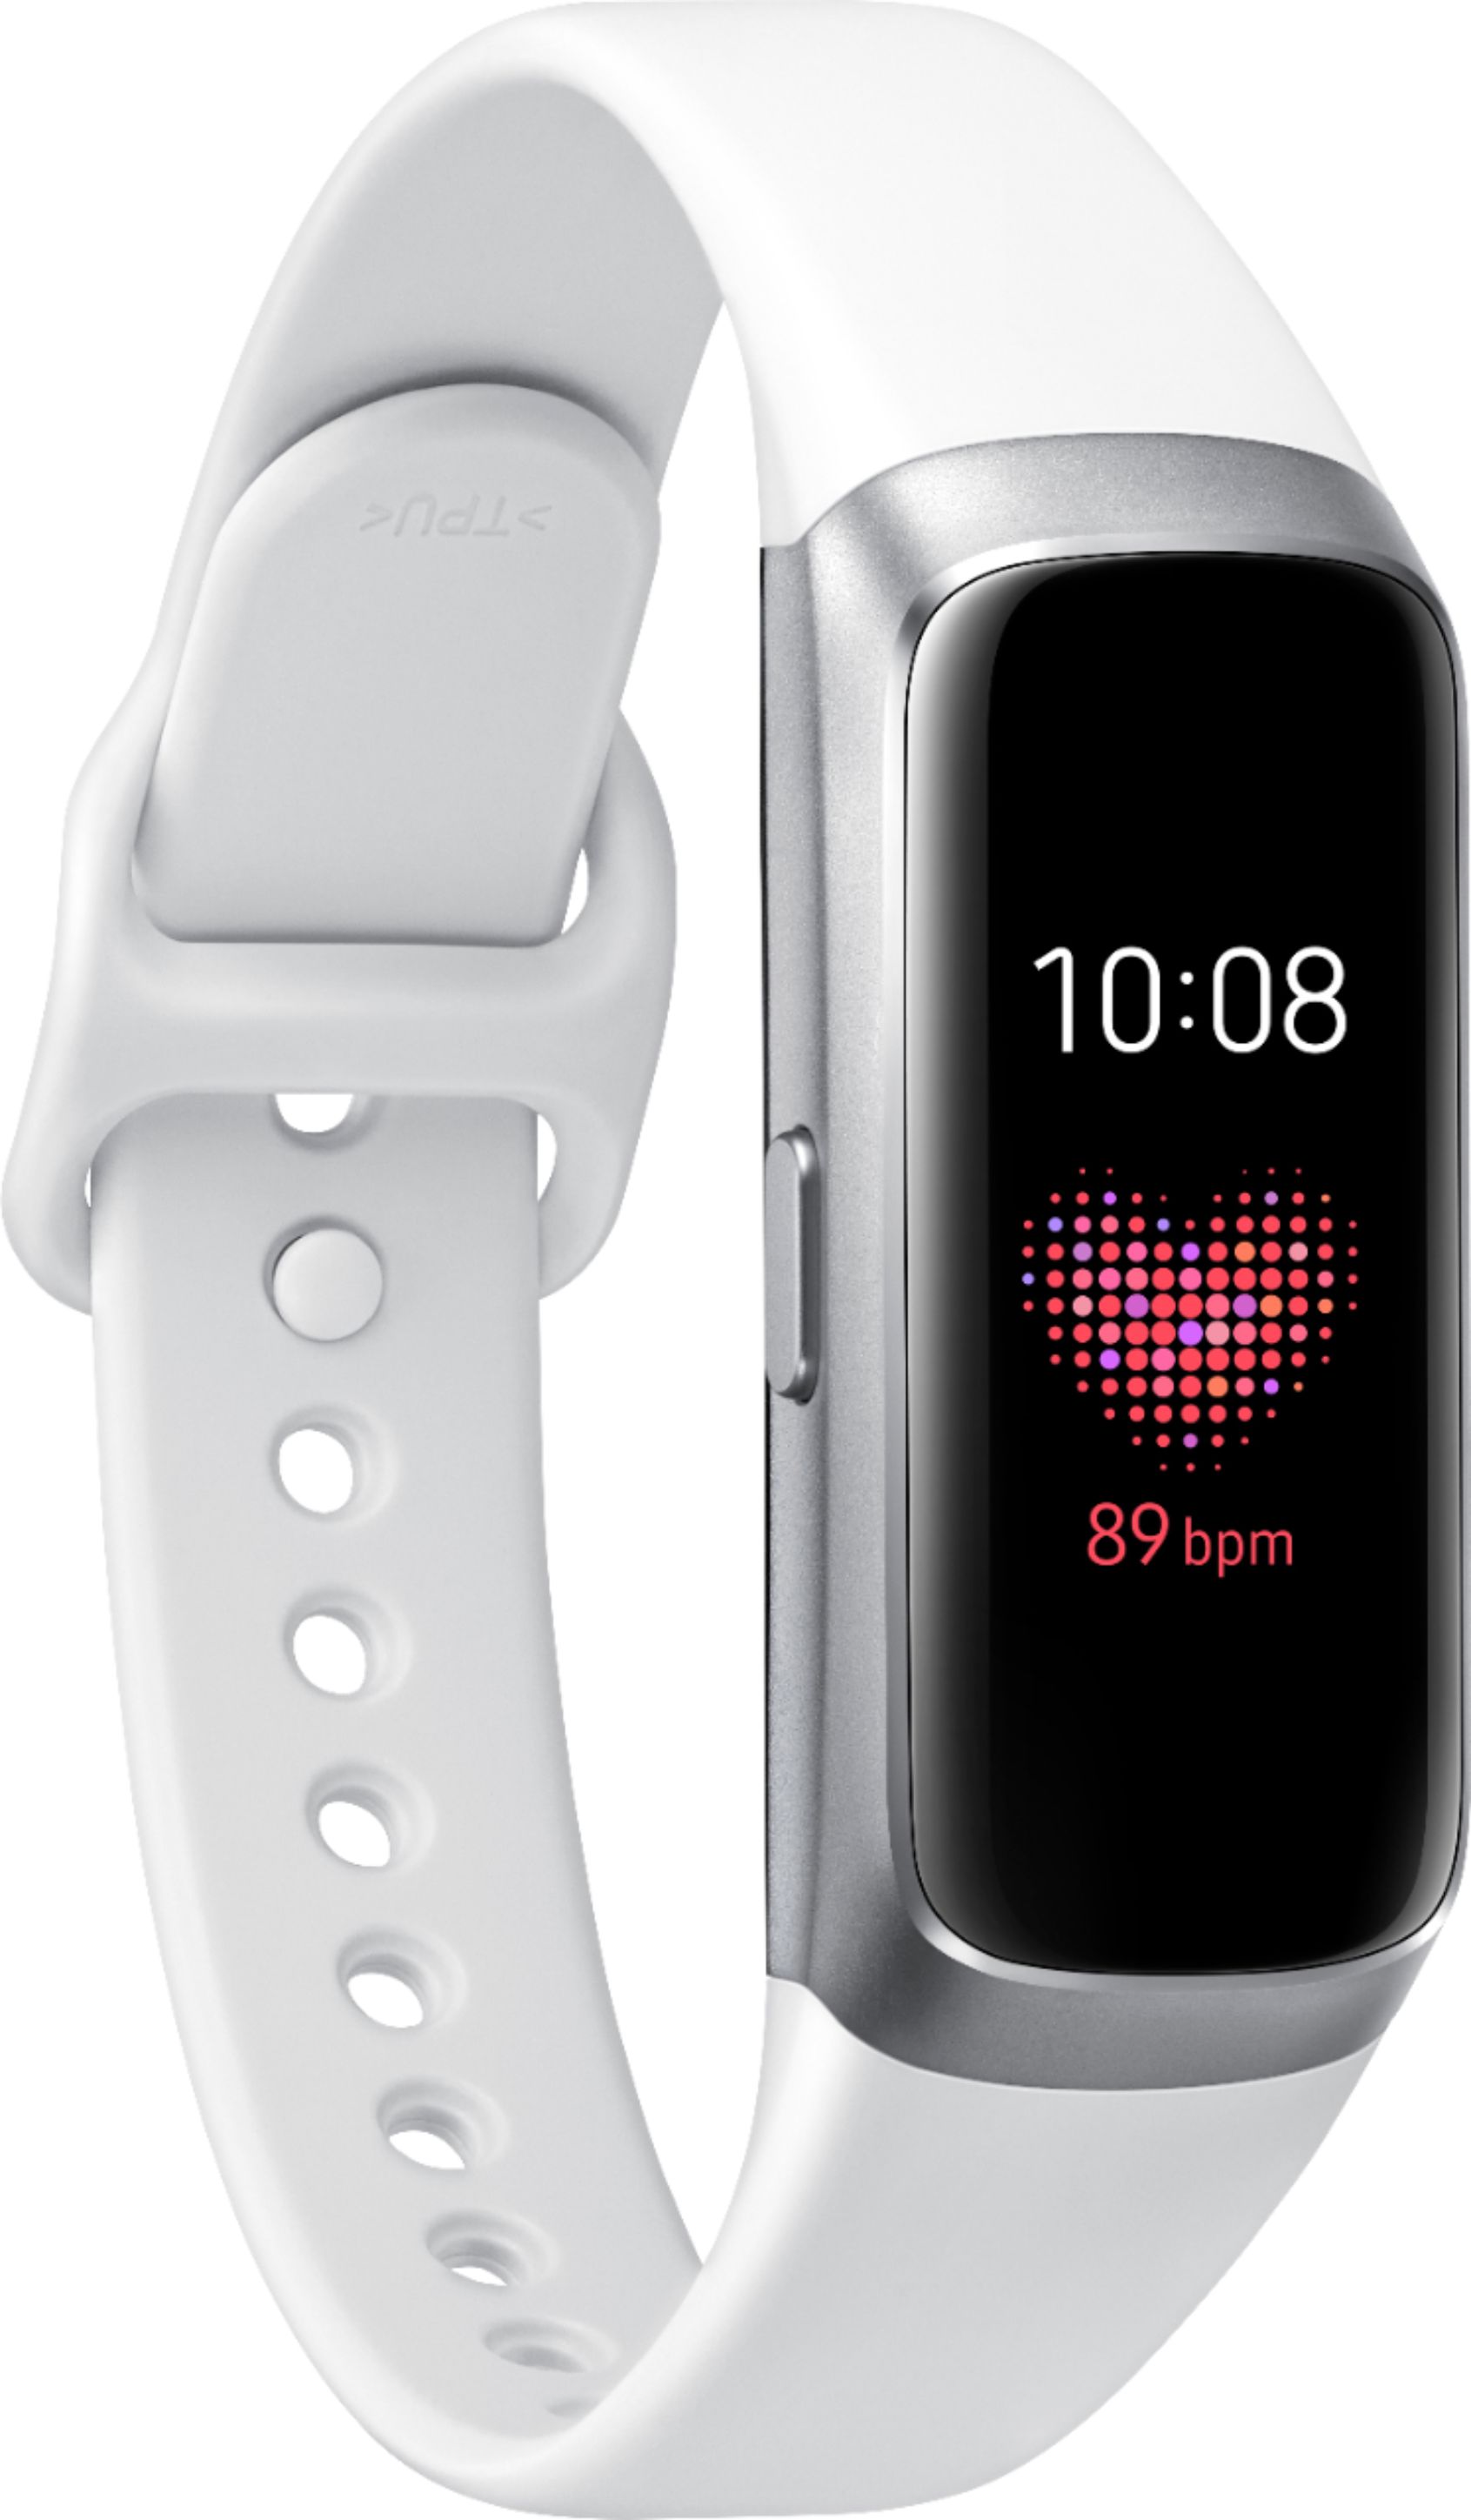 Zoom in on Front Zoom. Samsung - Galaxy Fit Activity Tracker + Heart Rate - White.